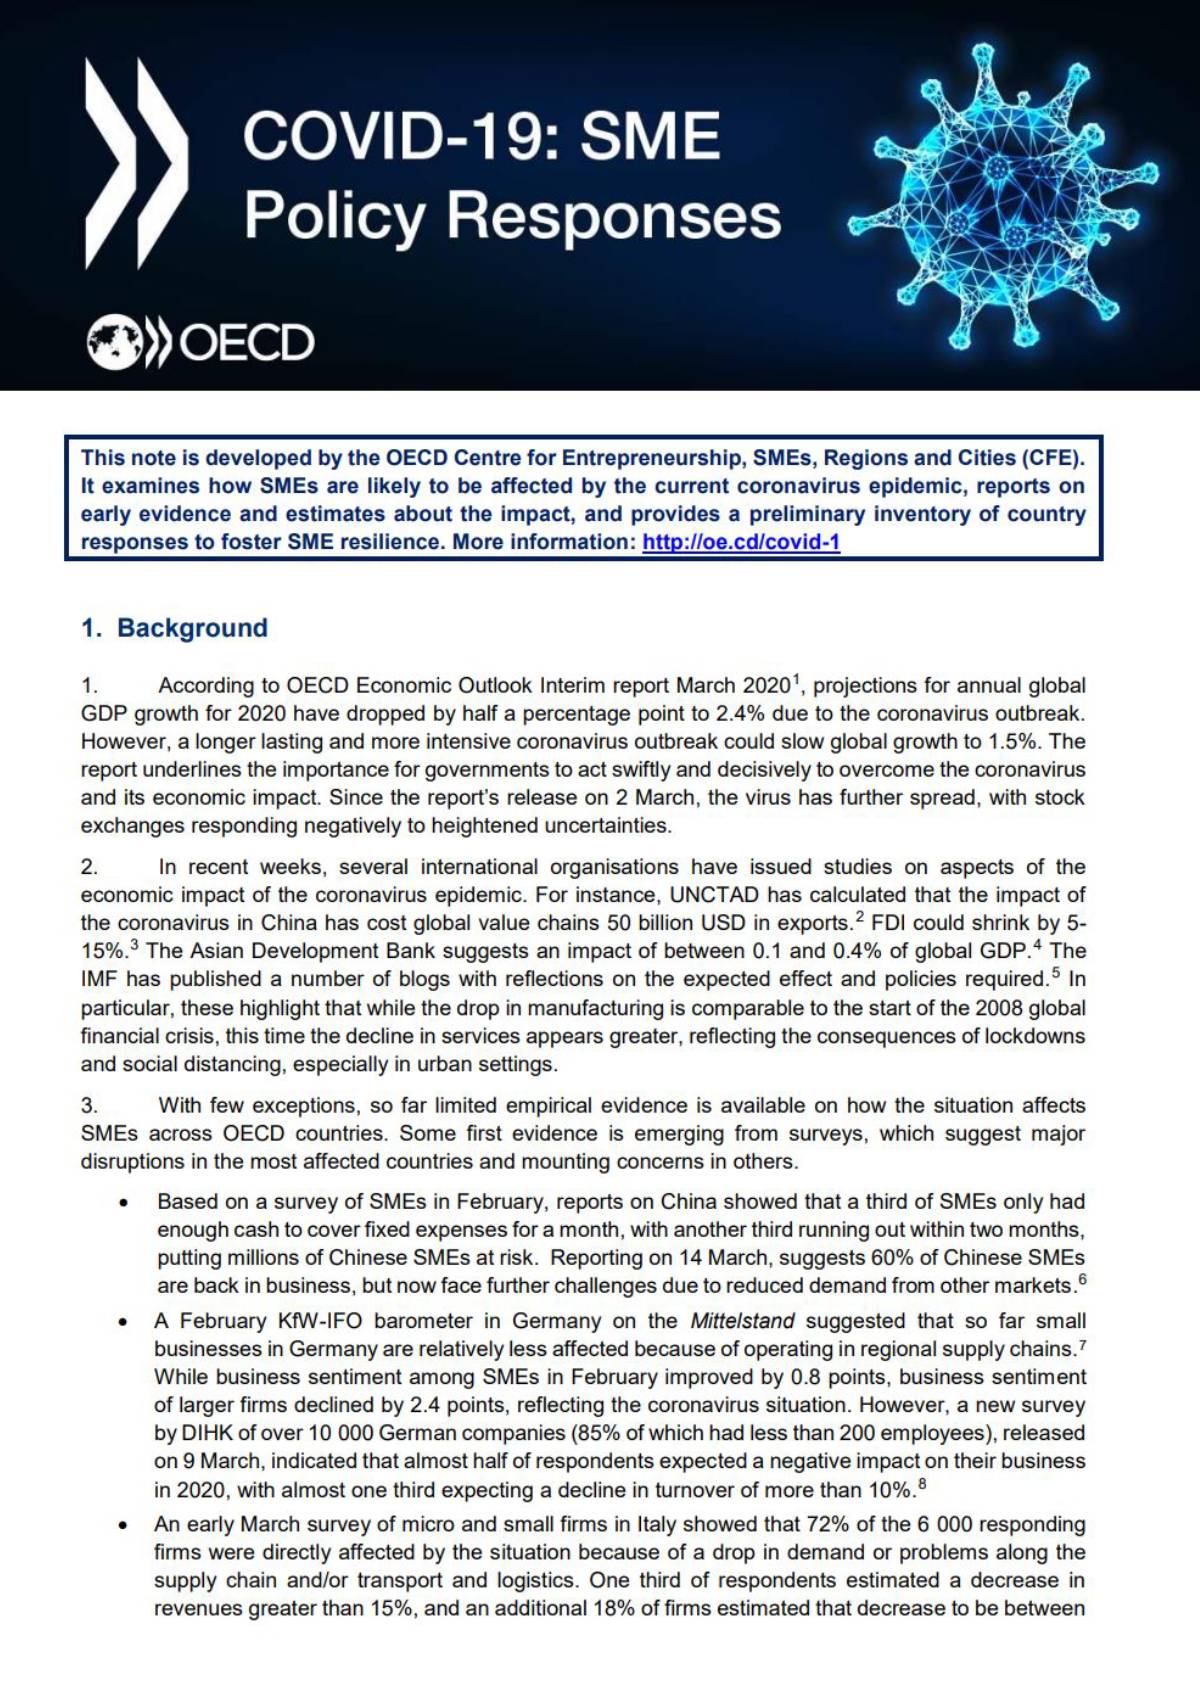 OECD Response to COVID - 19